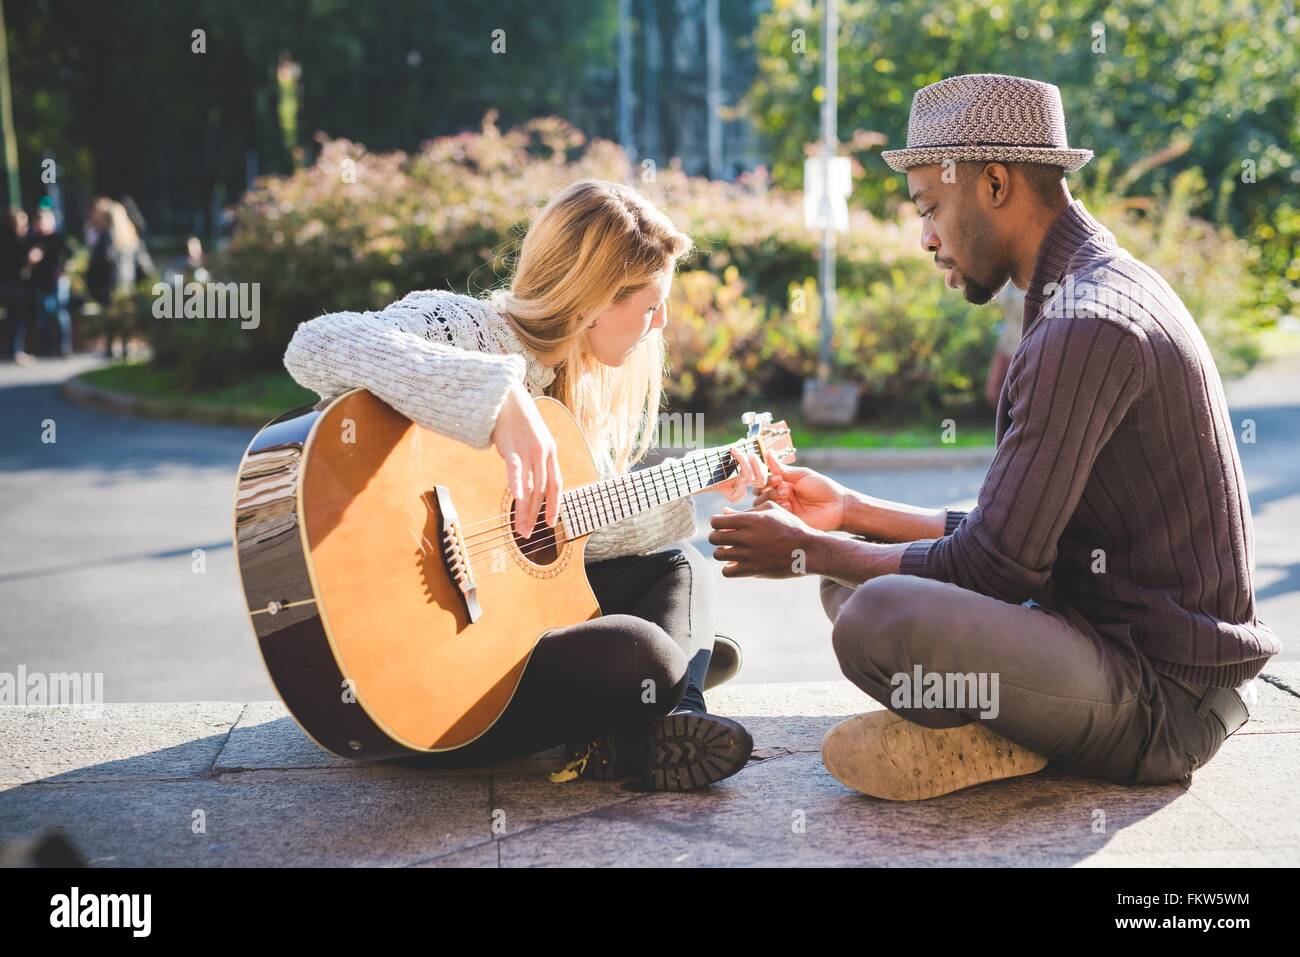 Couple learning to play guitar in park Stock Photo